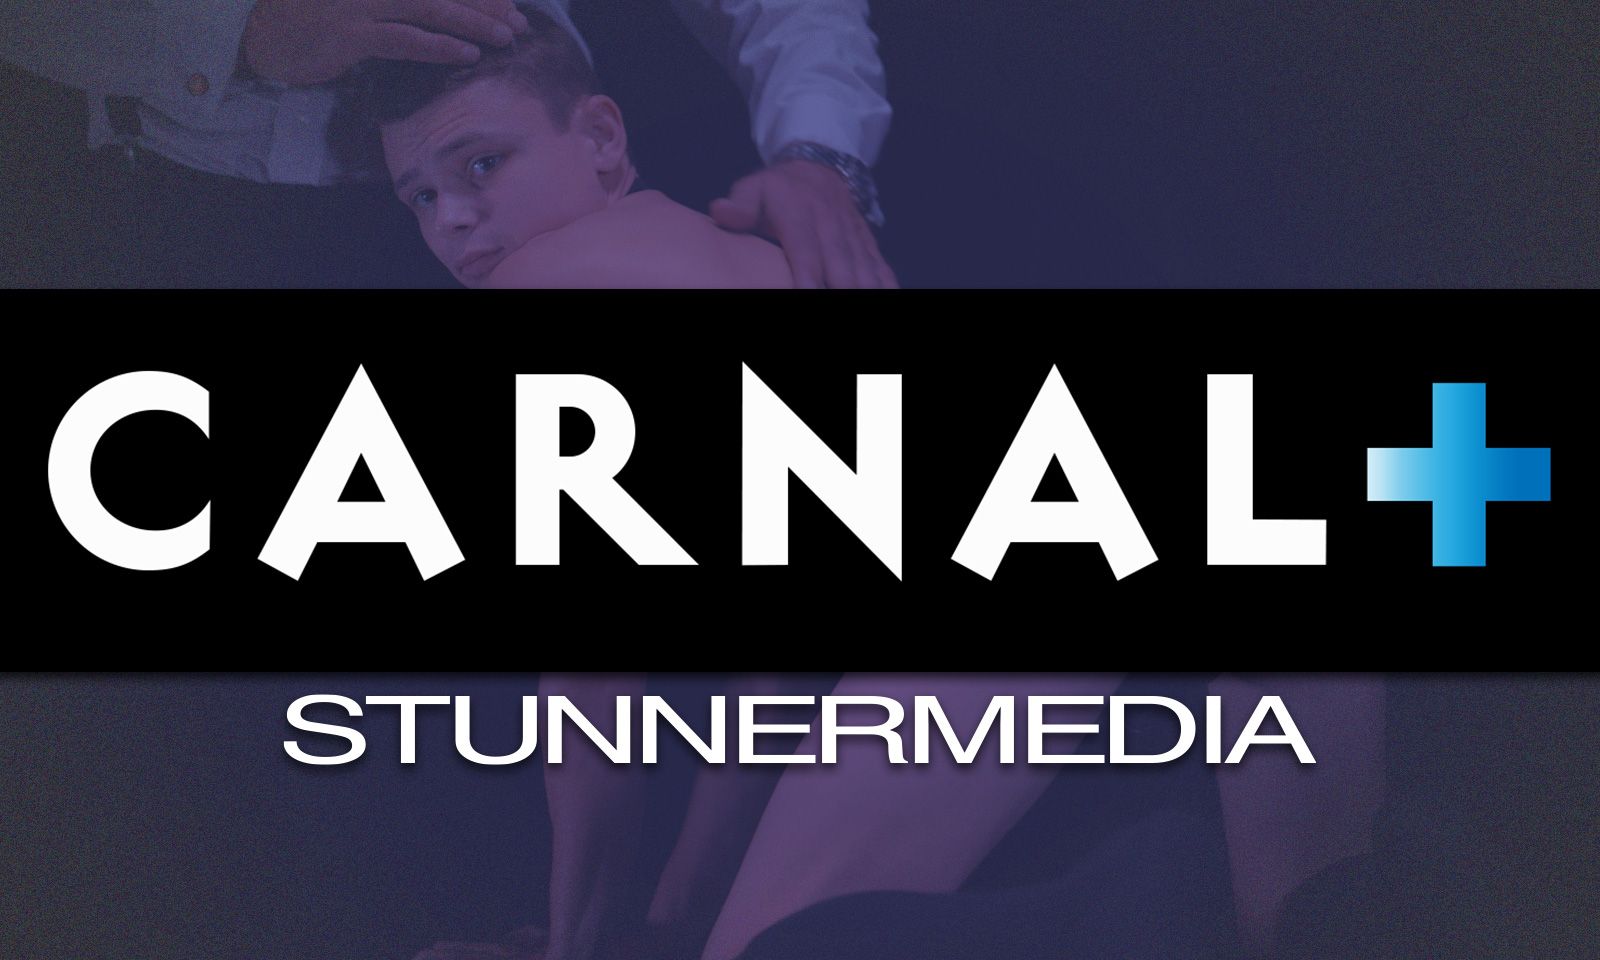 Carnal Media Signs Distribution Deal With Stunner Media